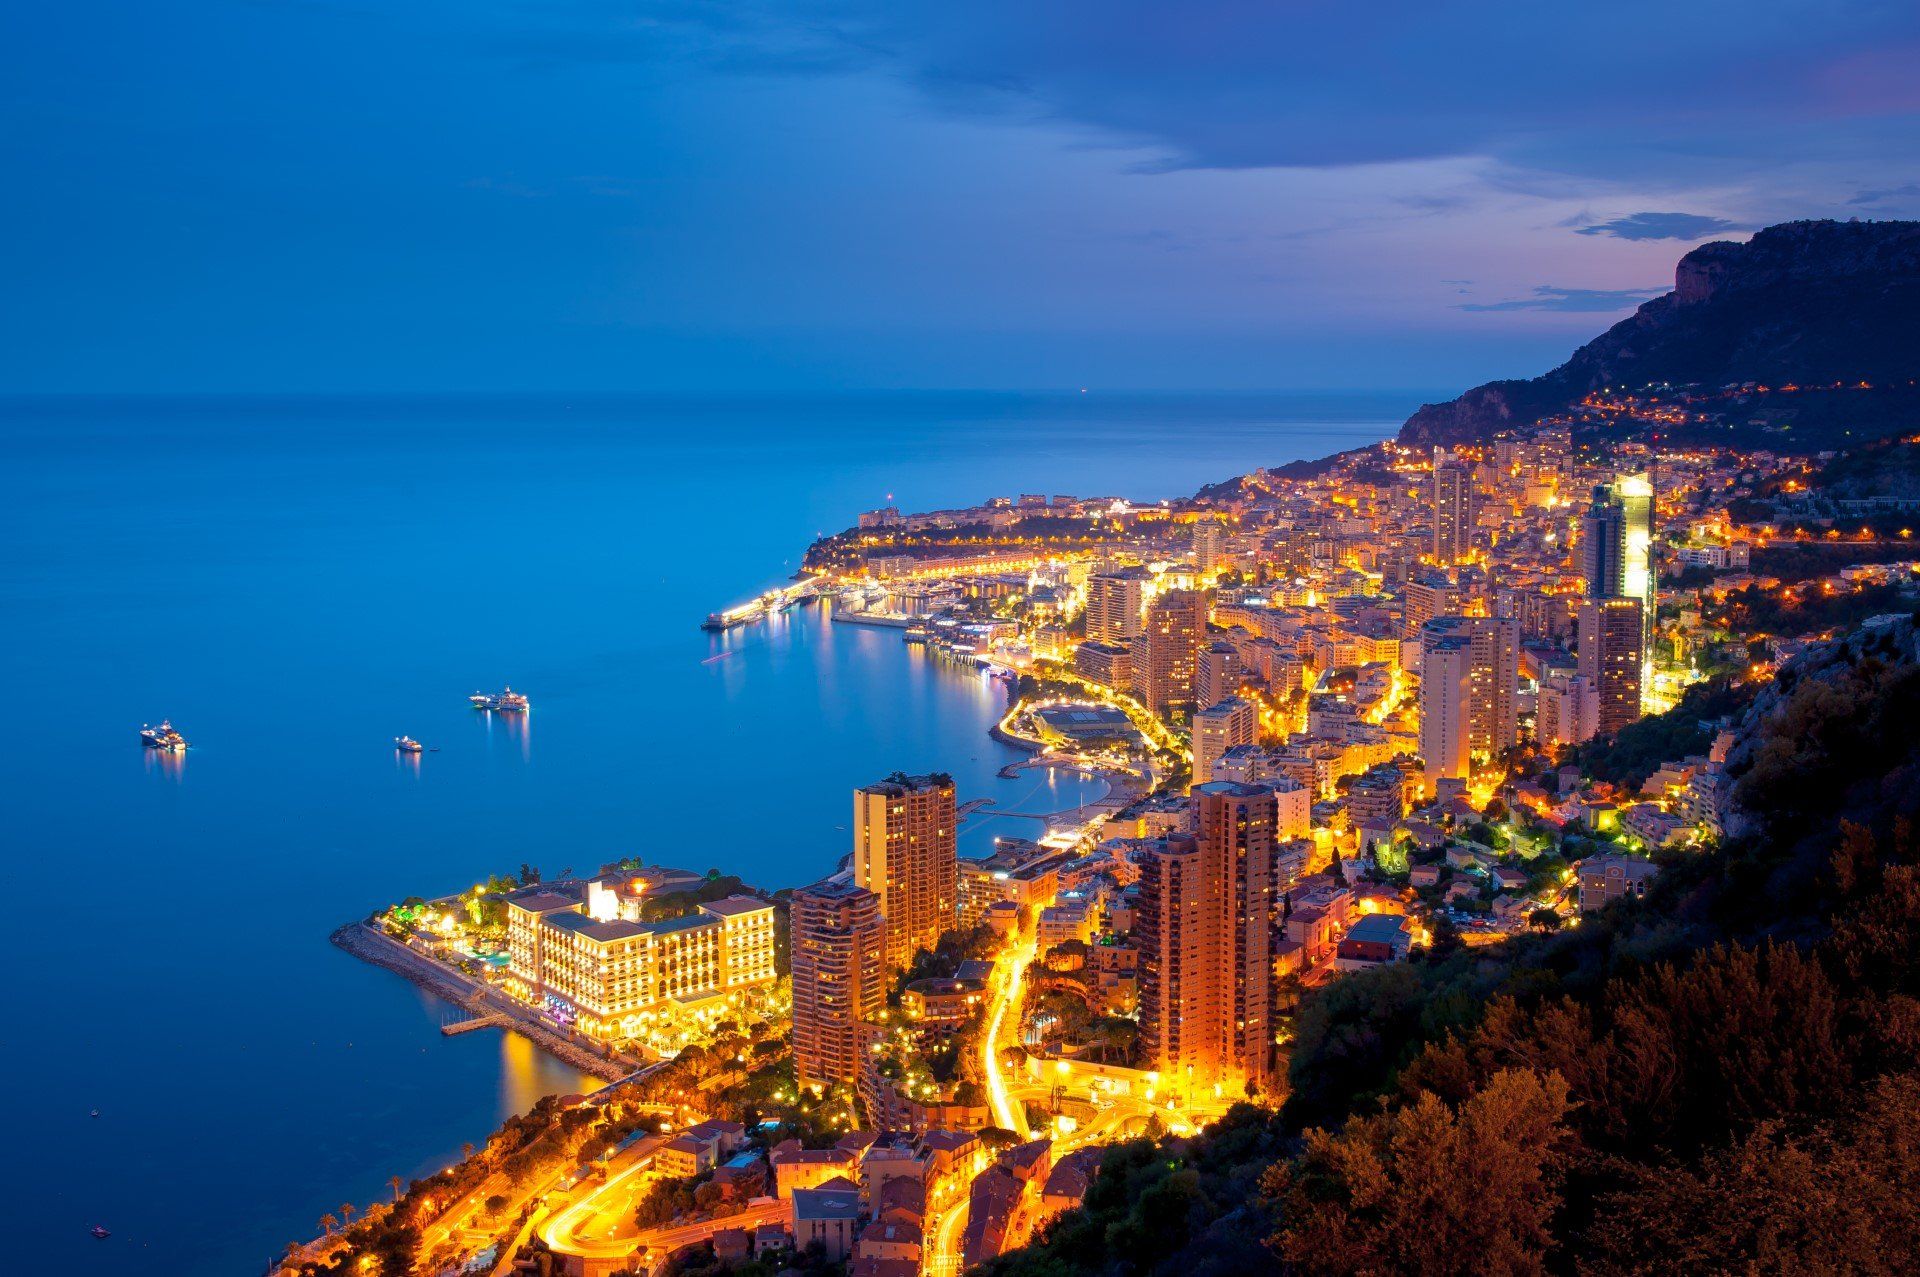  Renowned for sports and glamorous parties, holiday alongside the rich and famous in luxurious Monaco's Monte Carlo